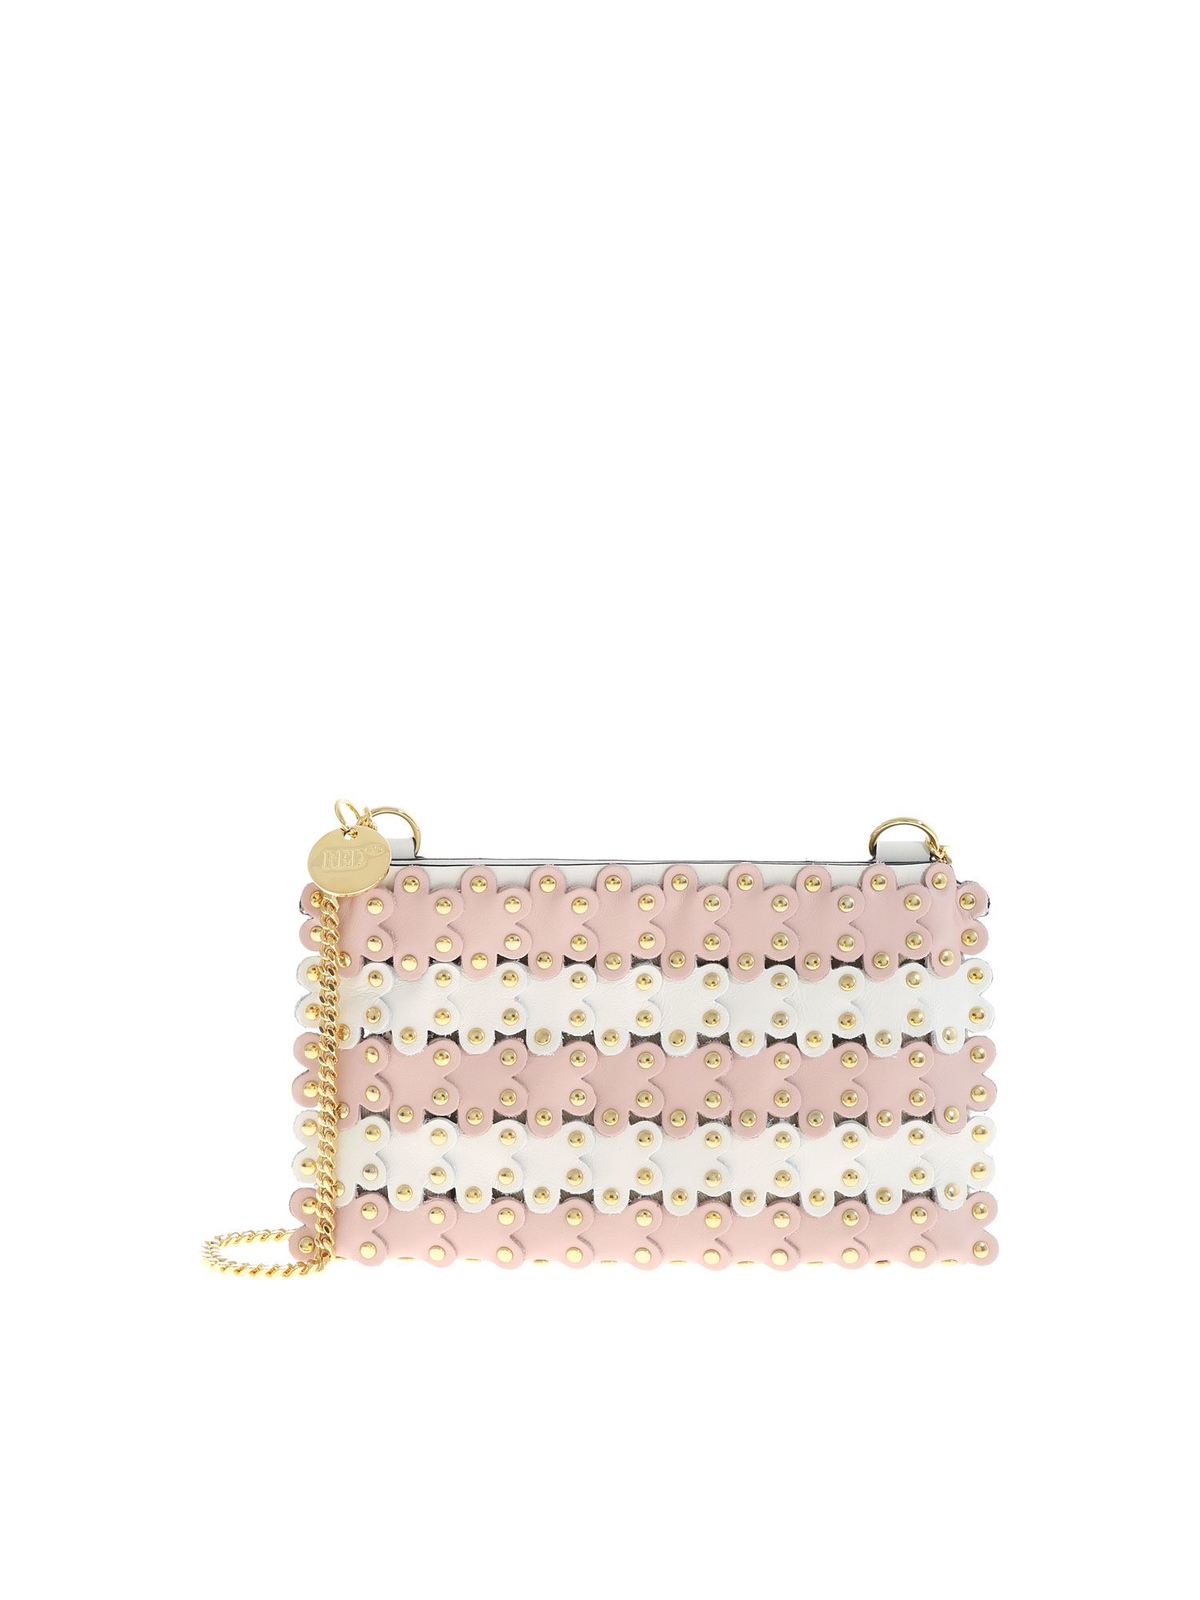 RED VALENTINO FLOWER PUZZLE CLUTCH BAG IN PINK AND WHITE